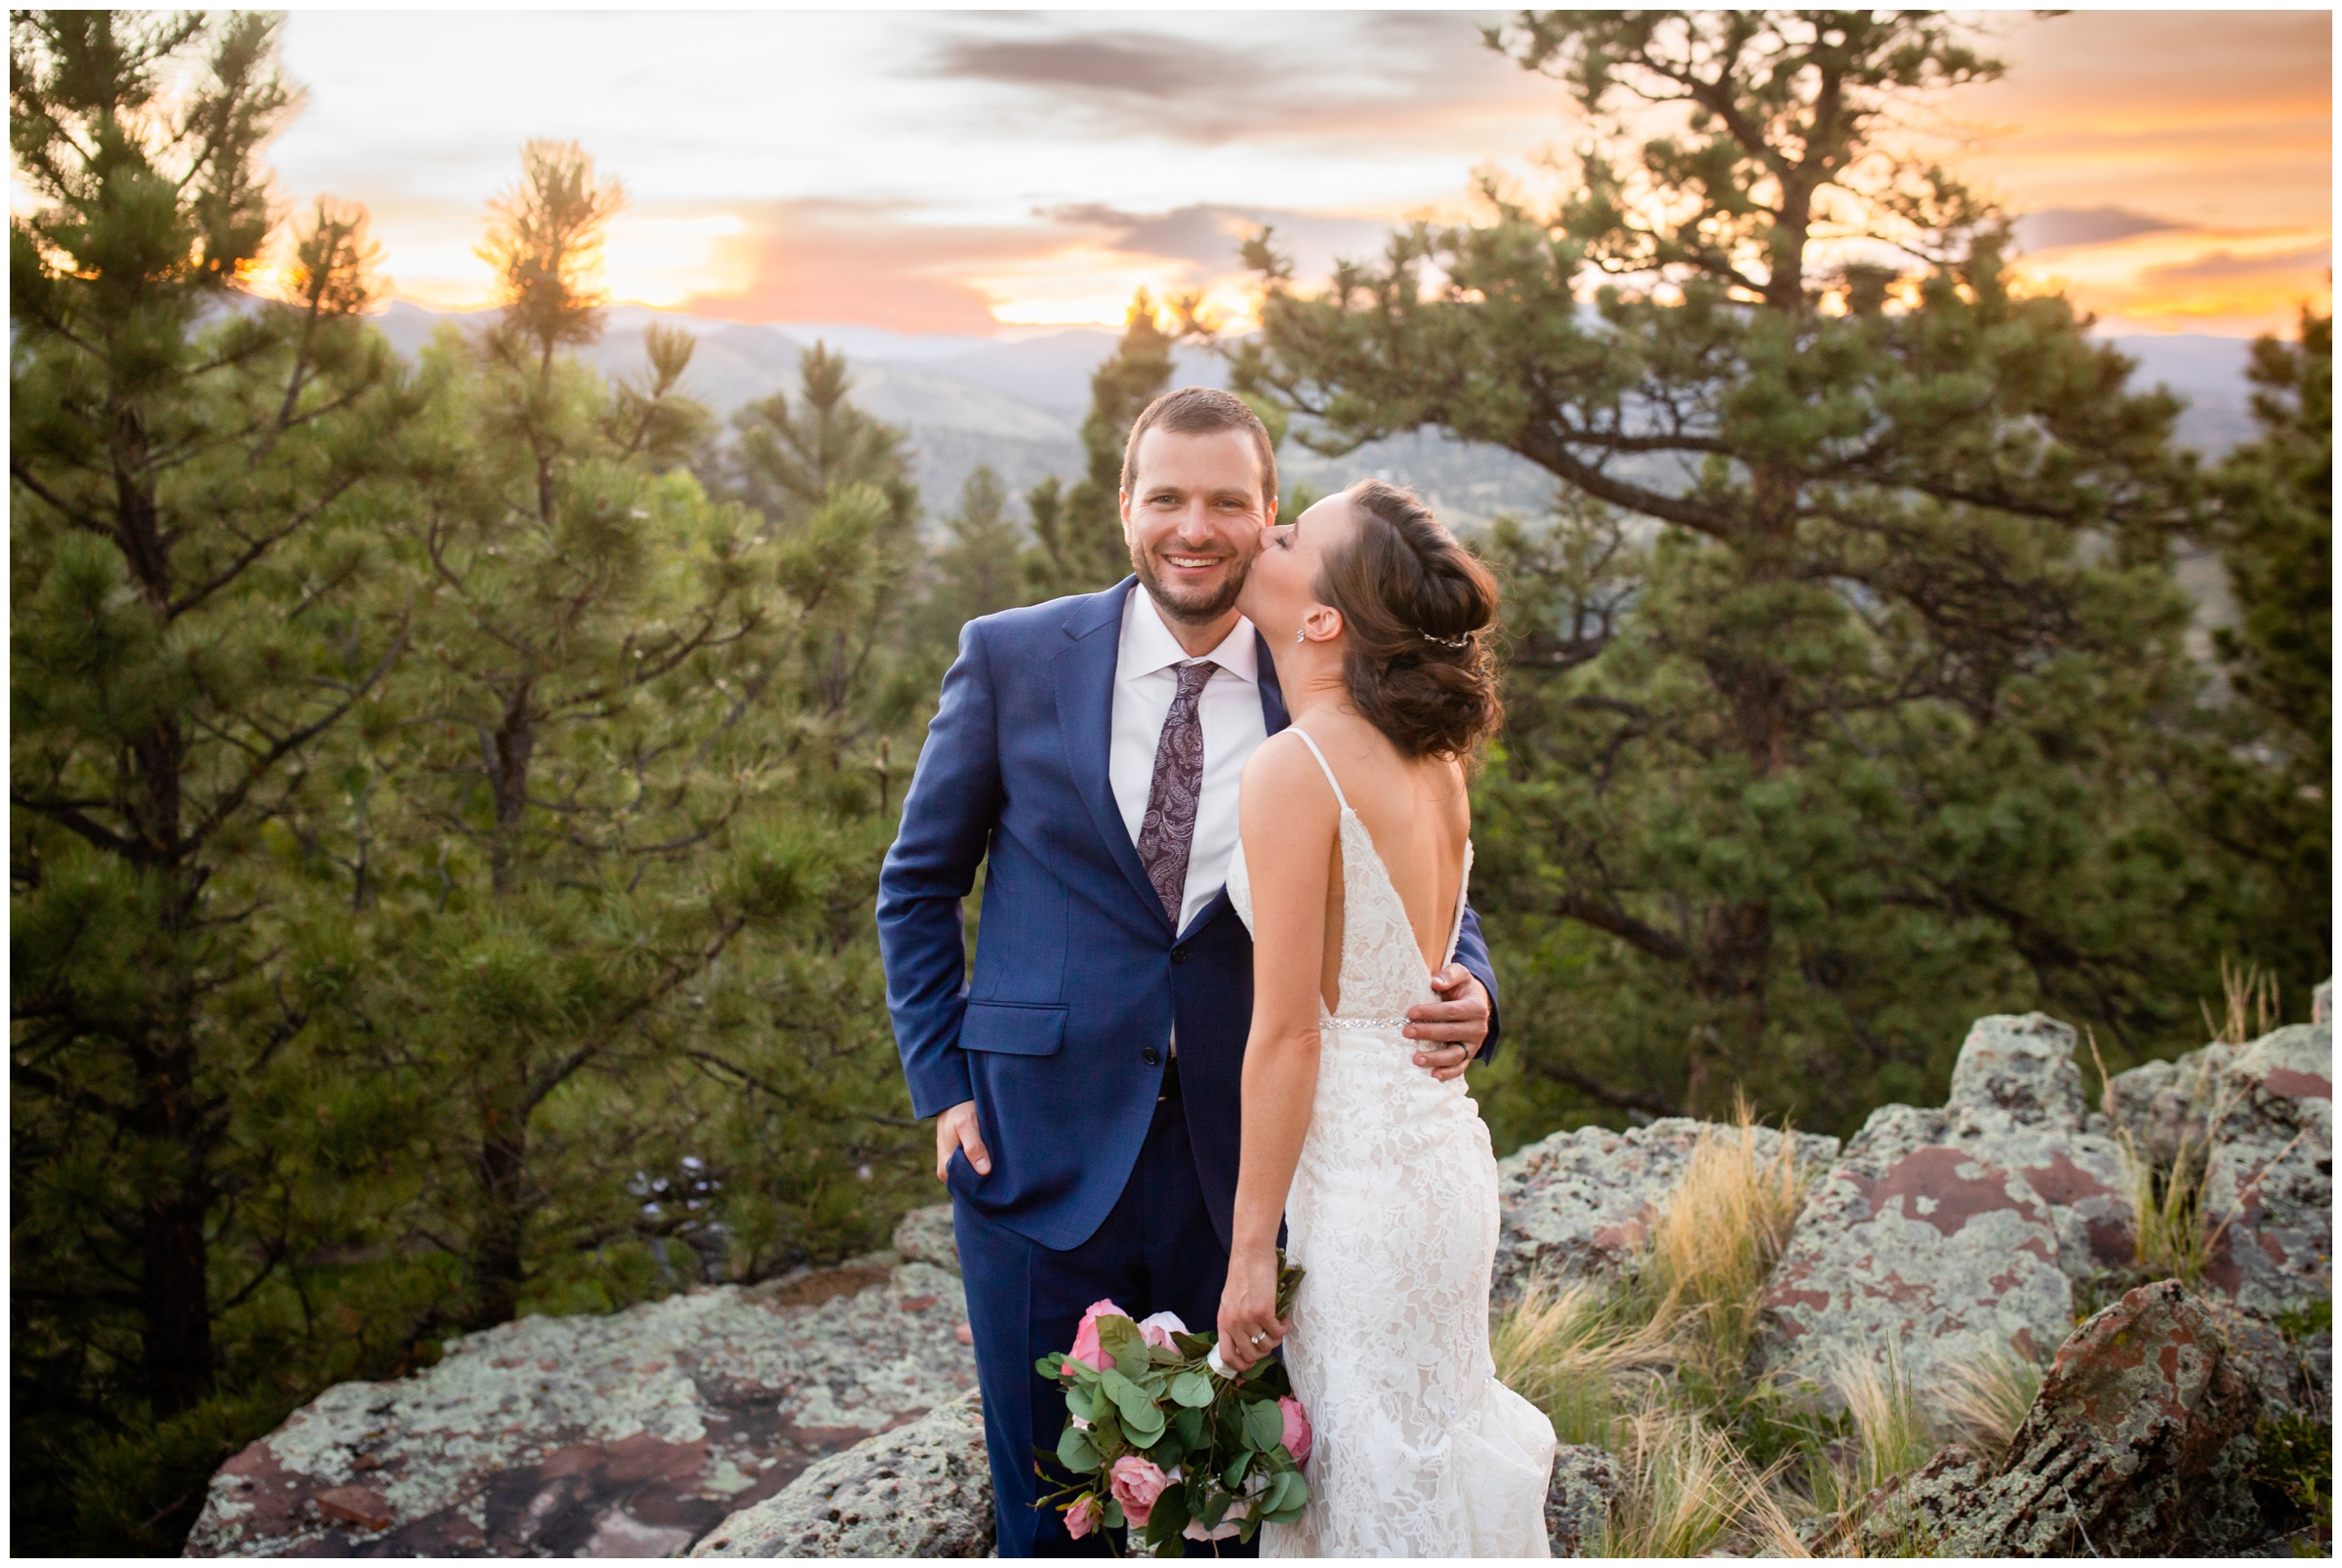 sunset wedding photography inspiration in the Colorado mountains at Lionscrest Manor 